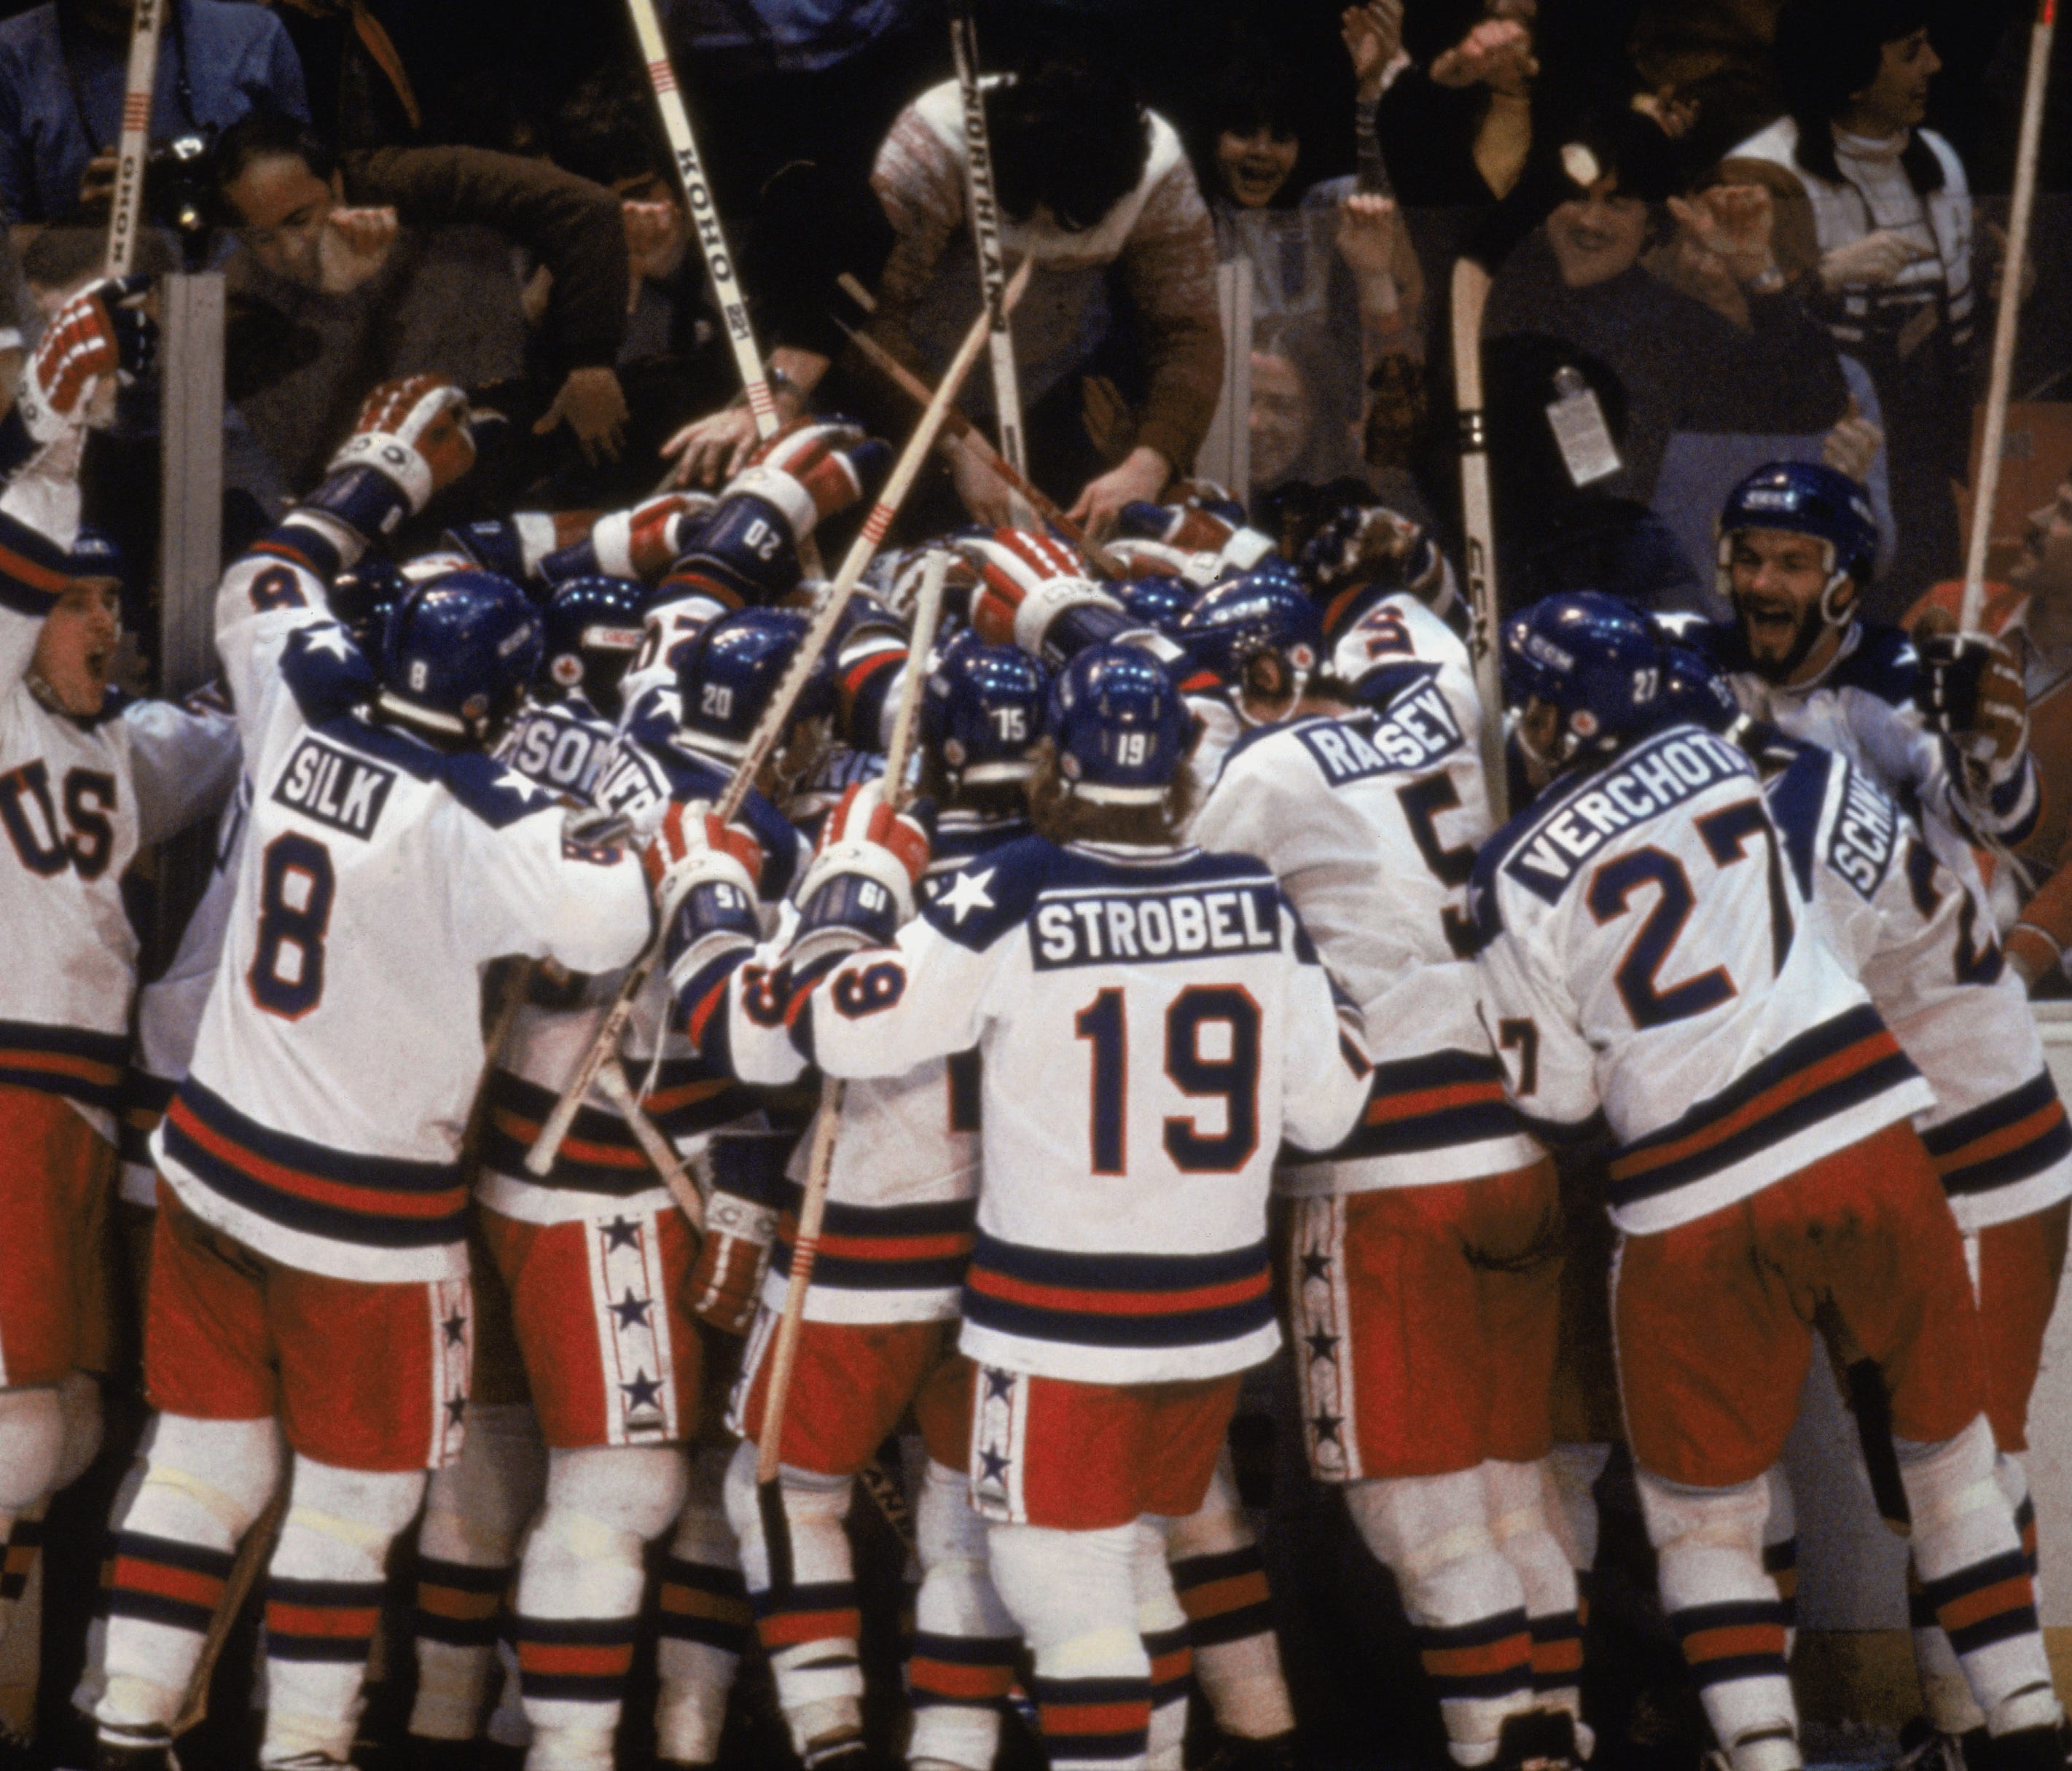 1980 US Olympic hockey players remember 'Miracle on Ice' 35 years later